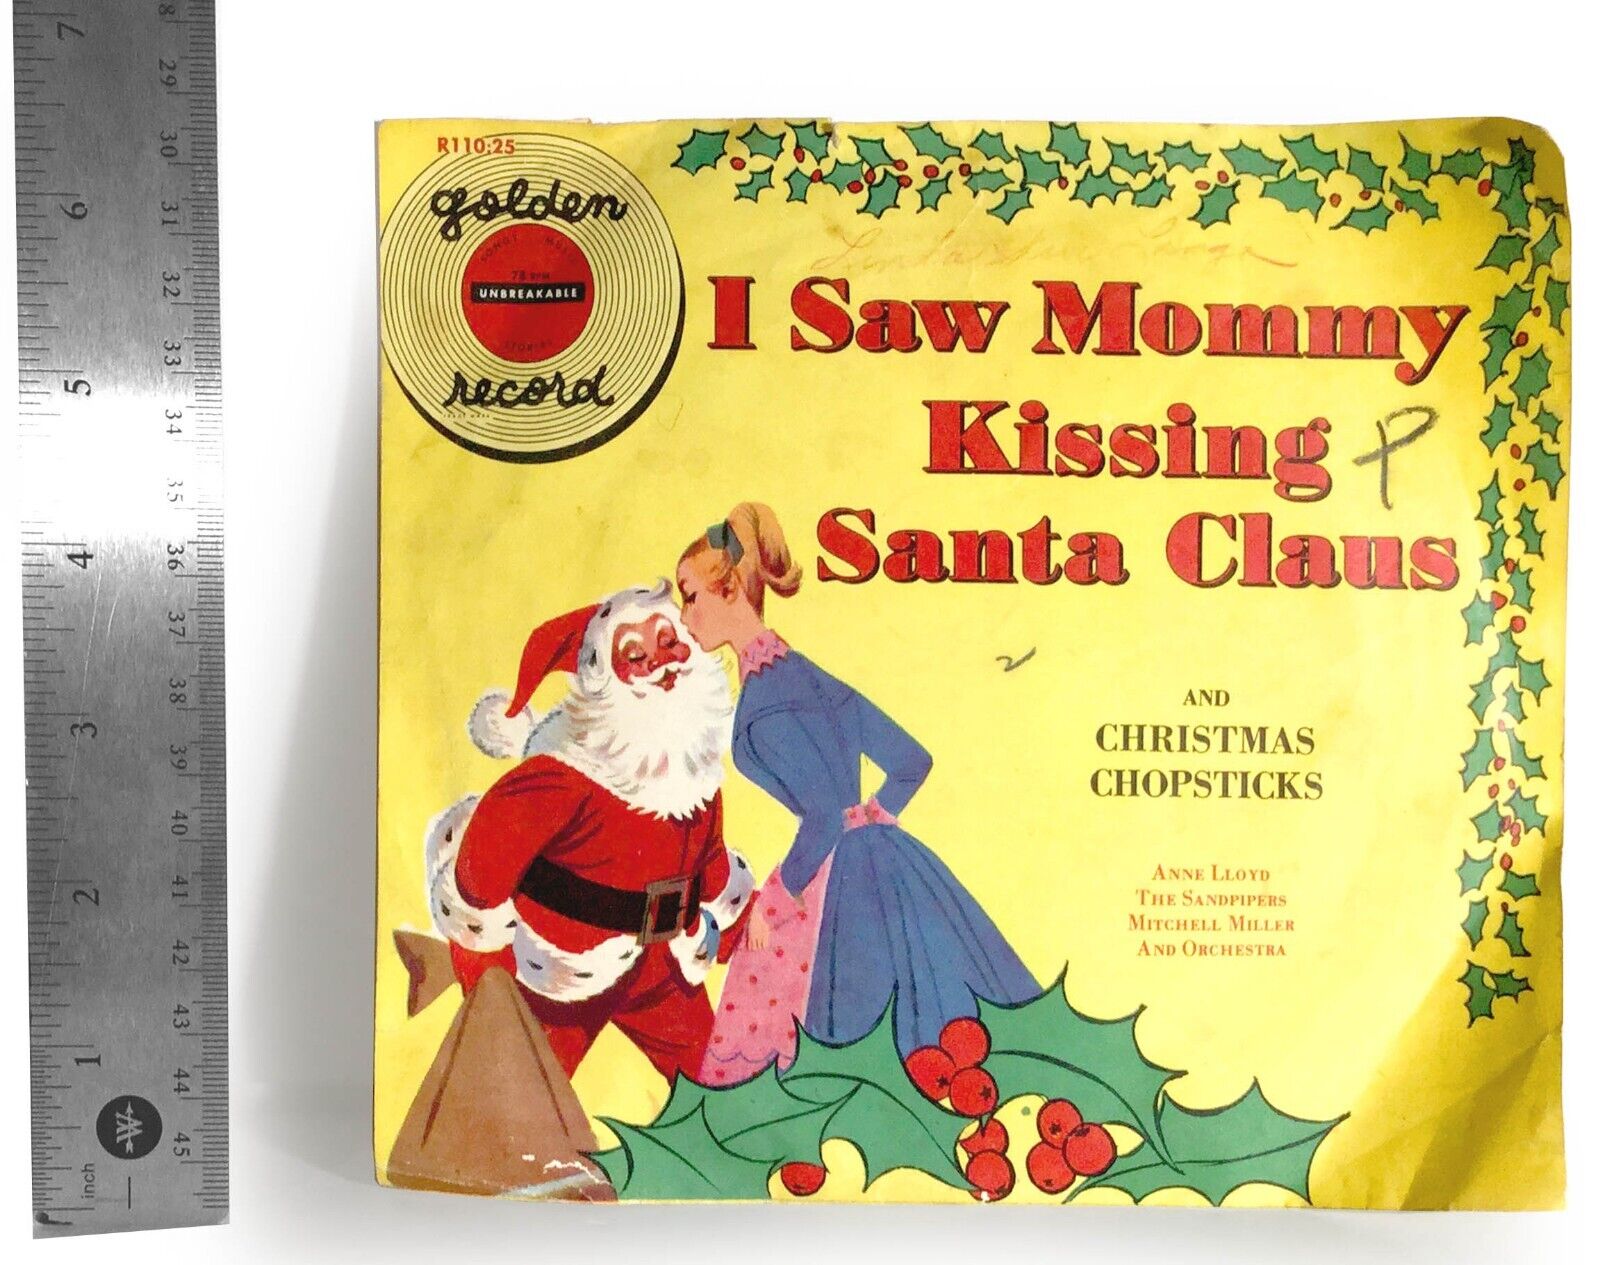 I Saw Mommy Kissing Santa Claus 45rpm Golden Record w/ Picture Sleeve